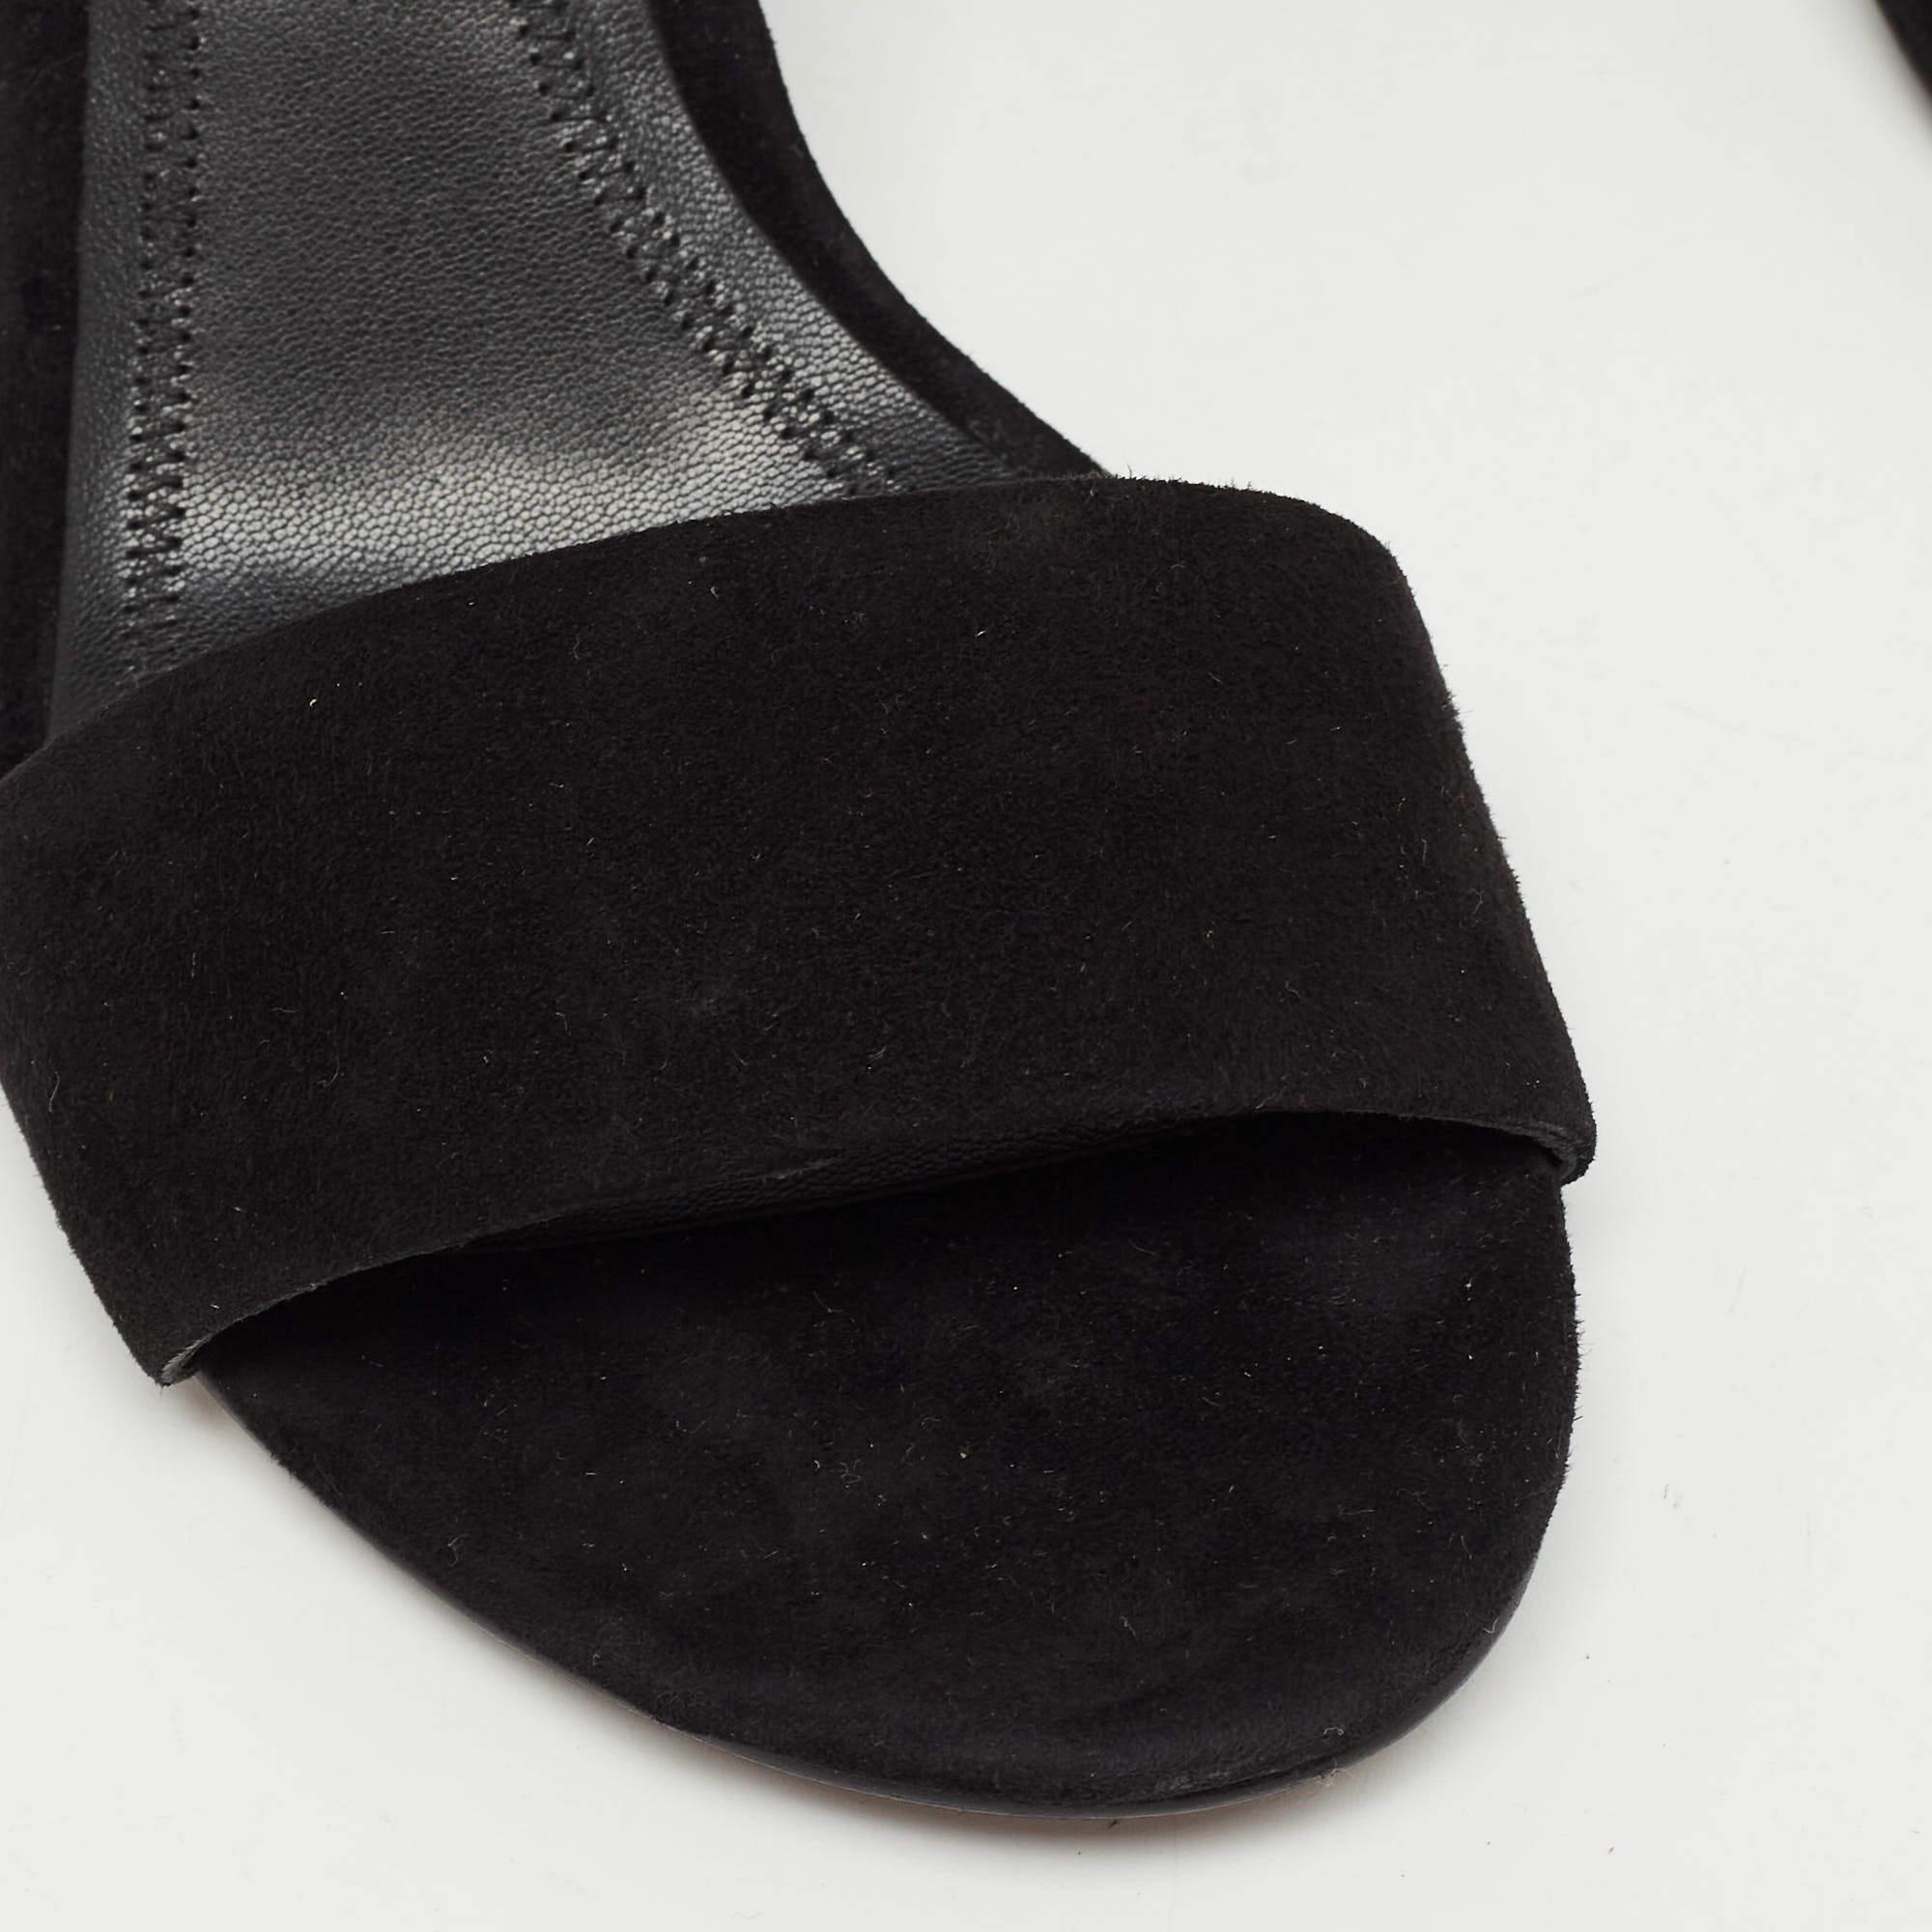 Alexander Wang Black Suede Abby Sandals Size 39 4